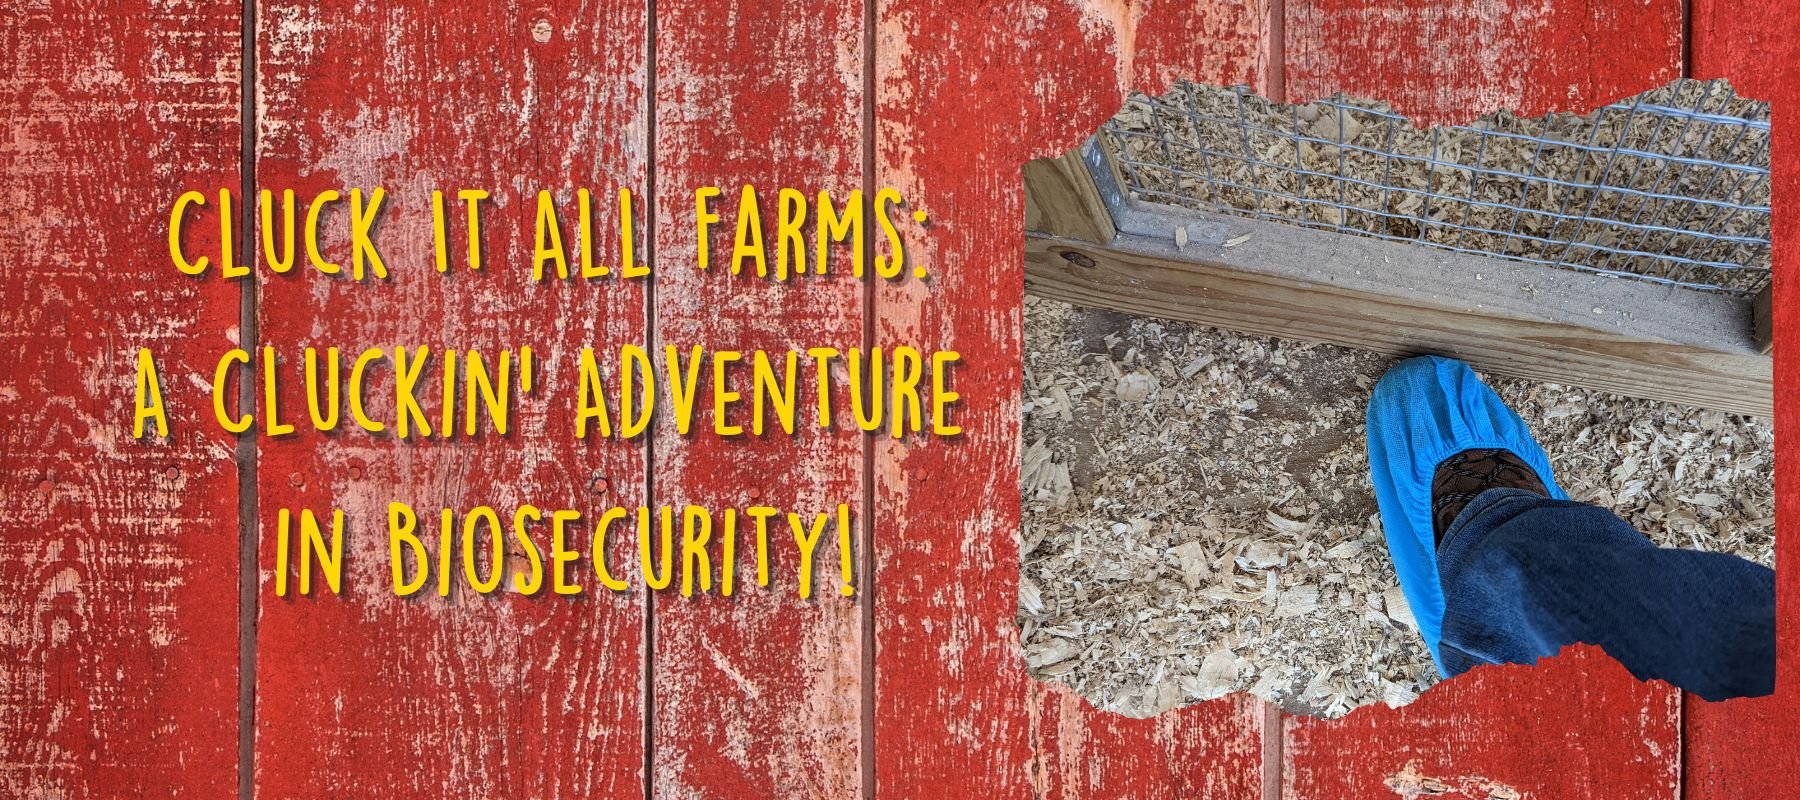 Cluck It All Farms: A Cluckin' Adventure in Biosecurity! - Cluck It All Farms